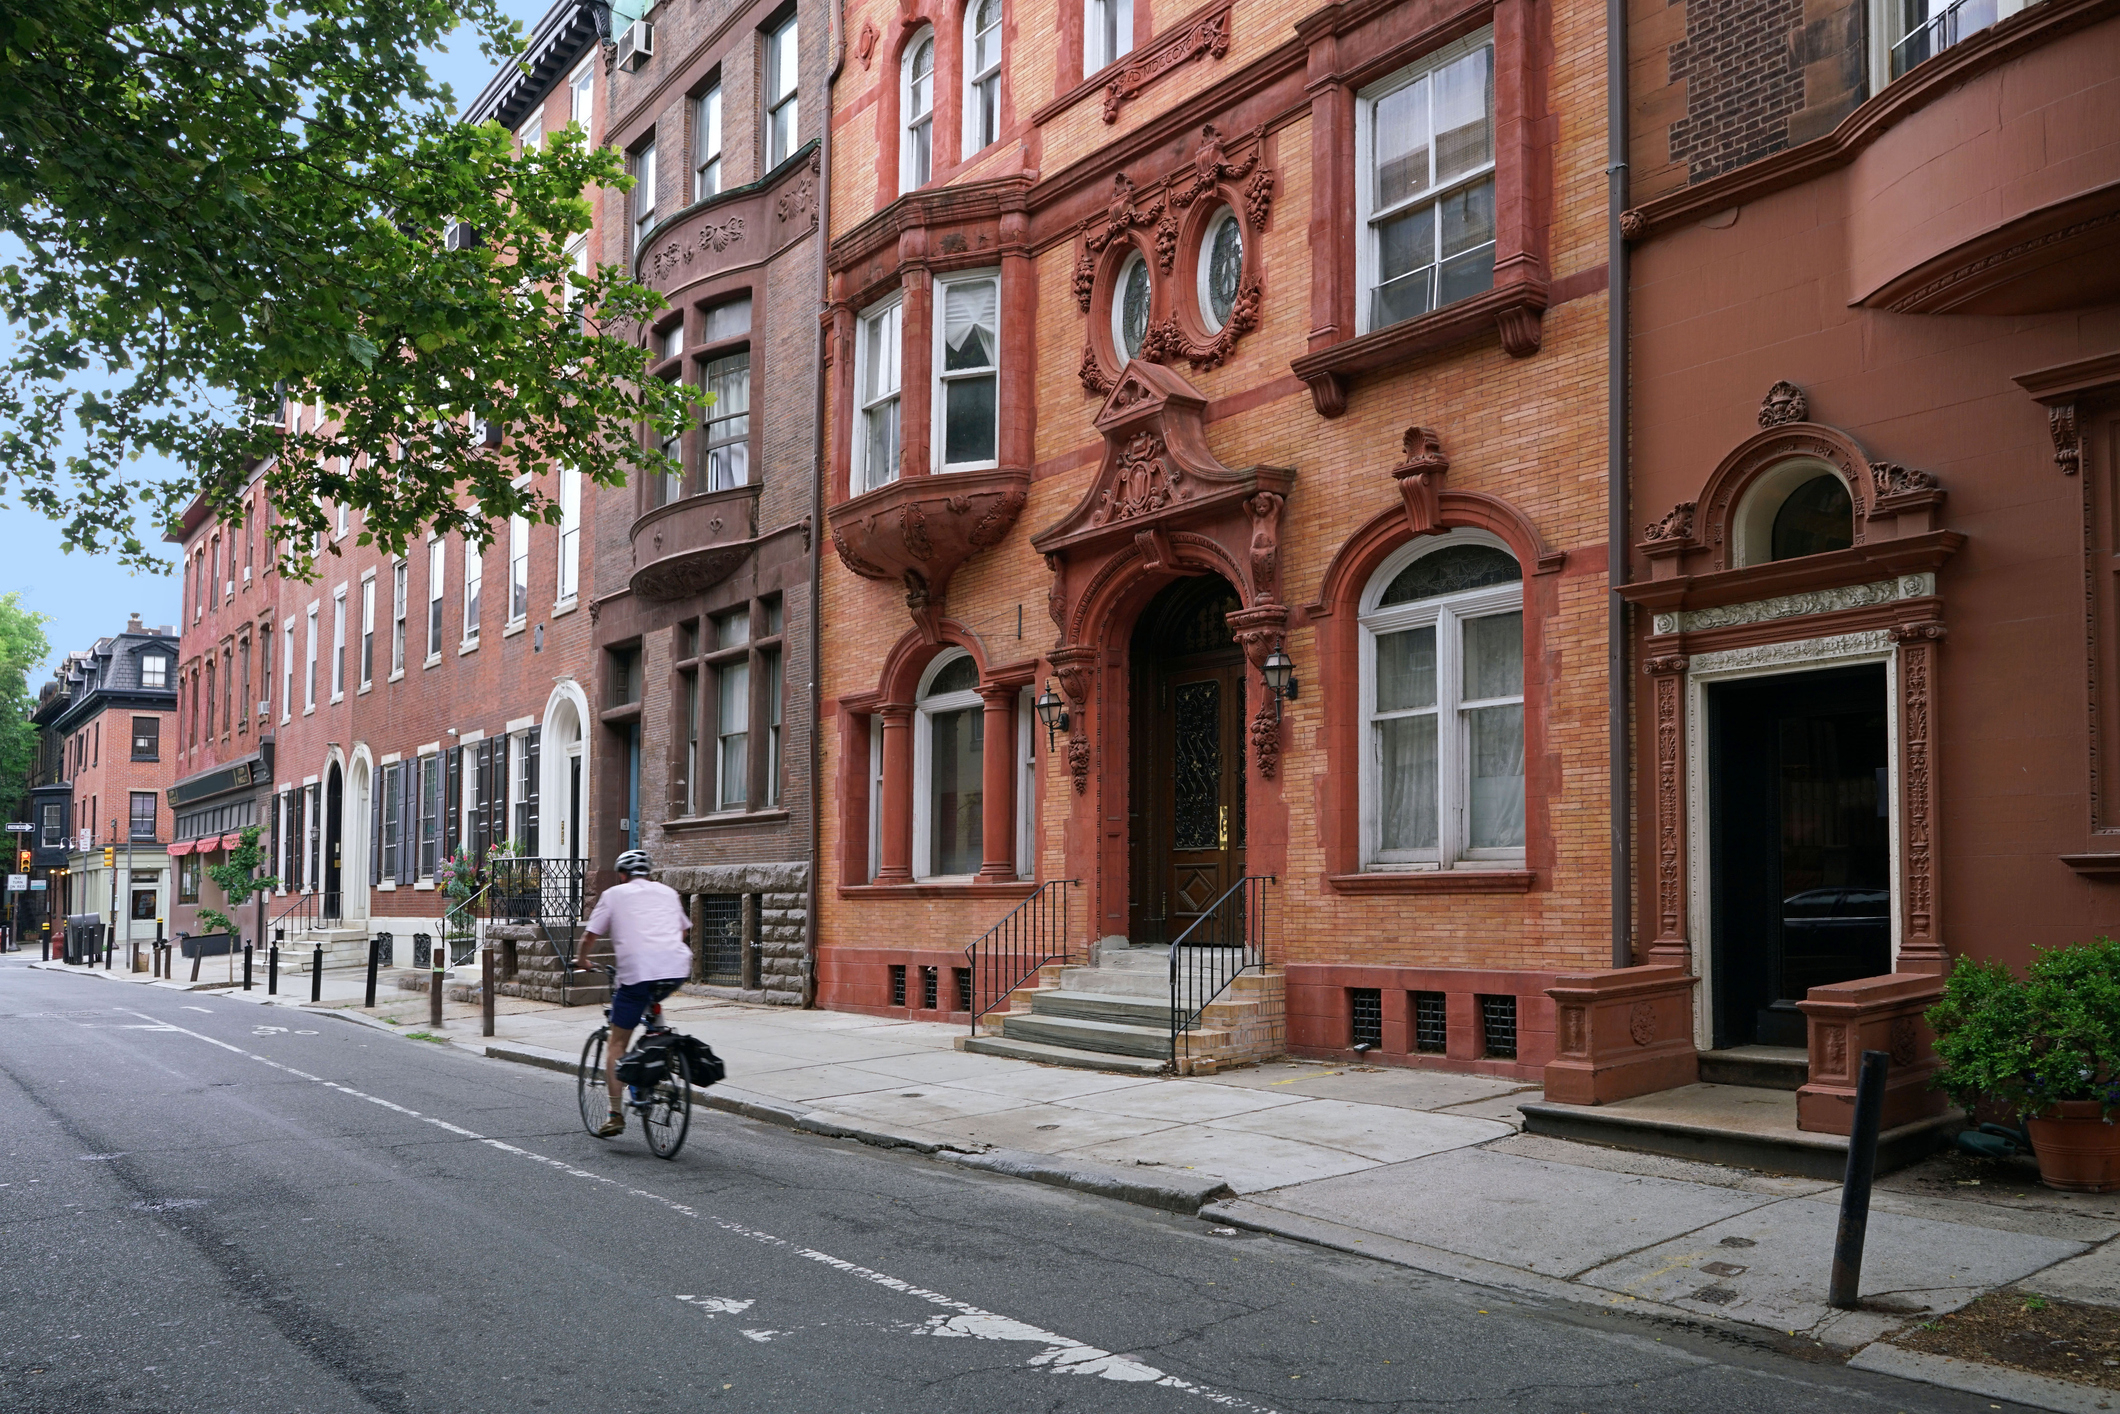 A cyclist in a white shirt rides down a quiet residential street lined with historic brownstone buildings